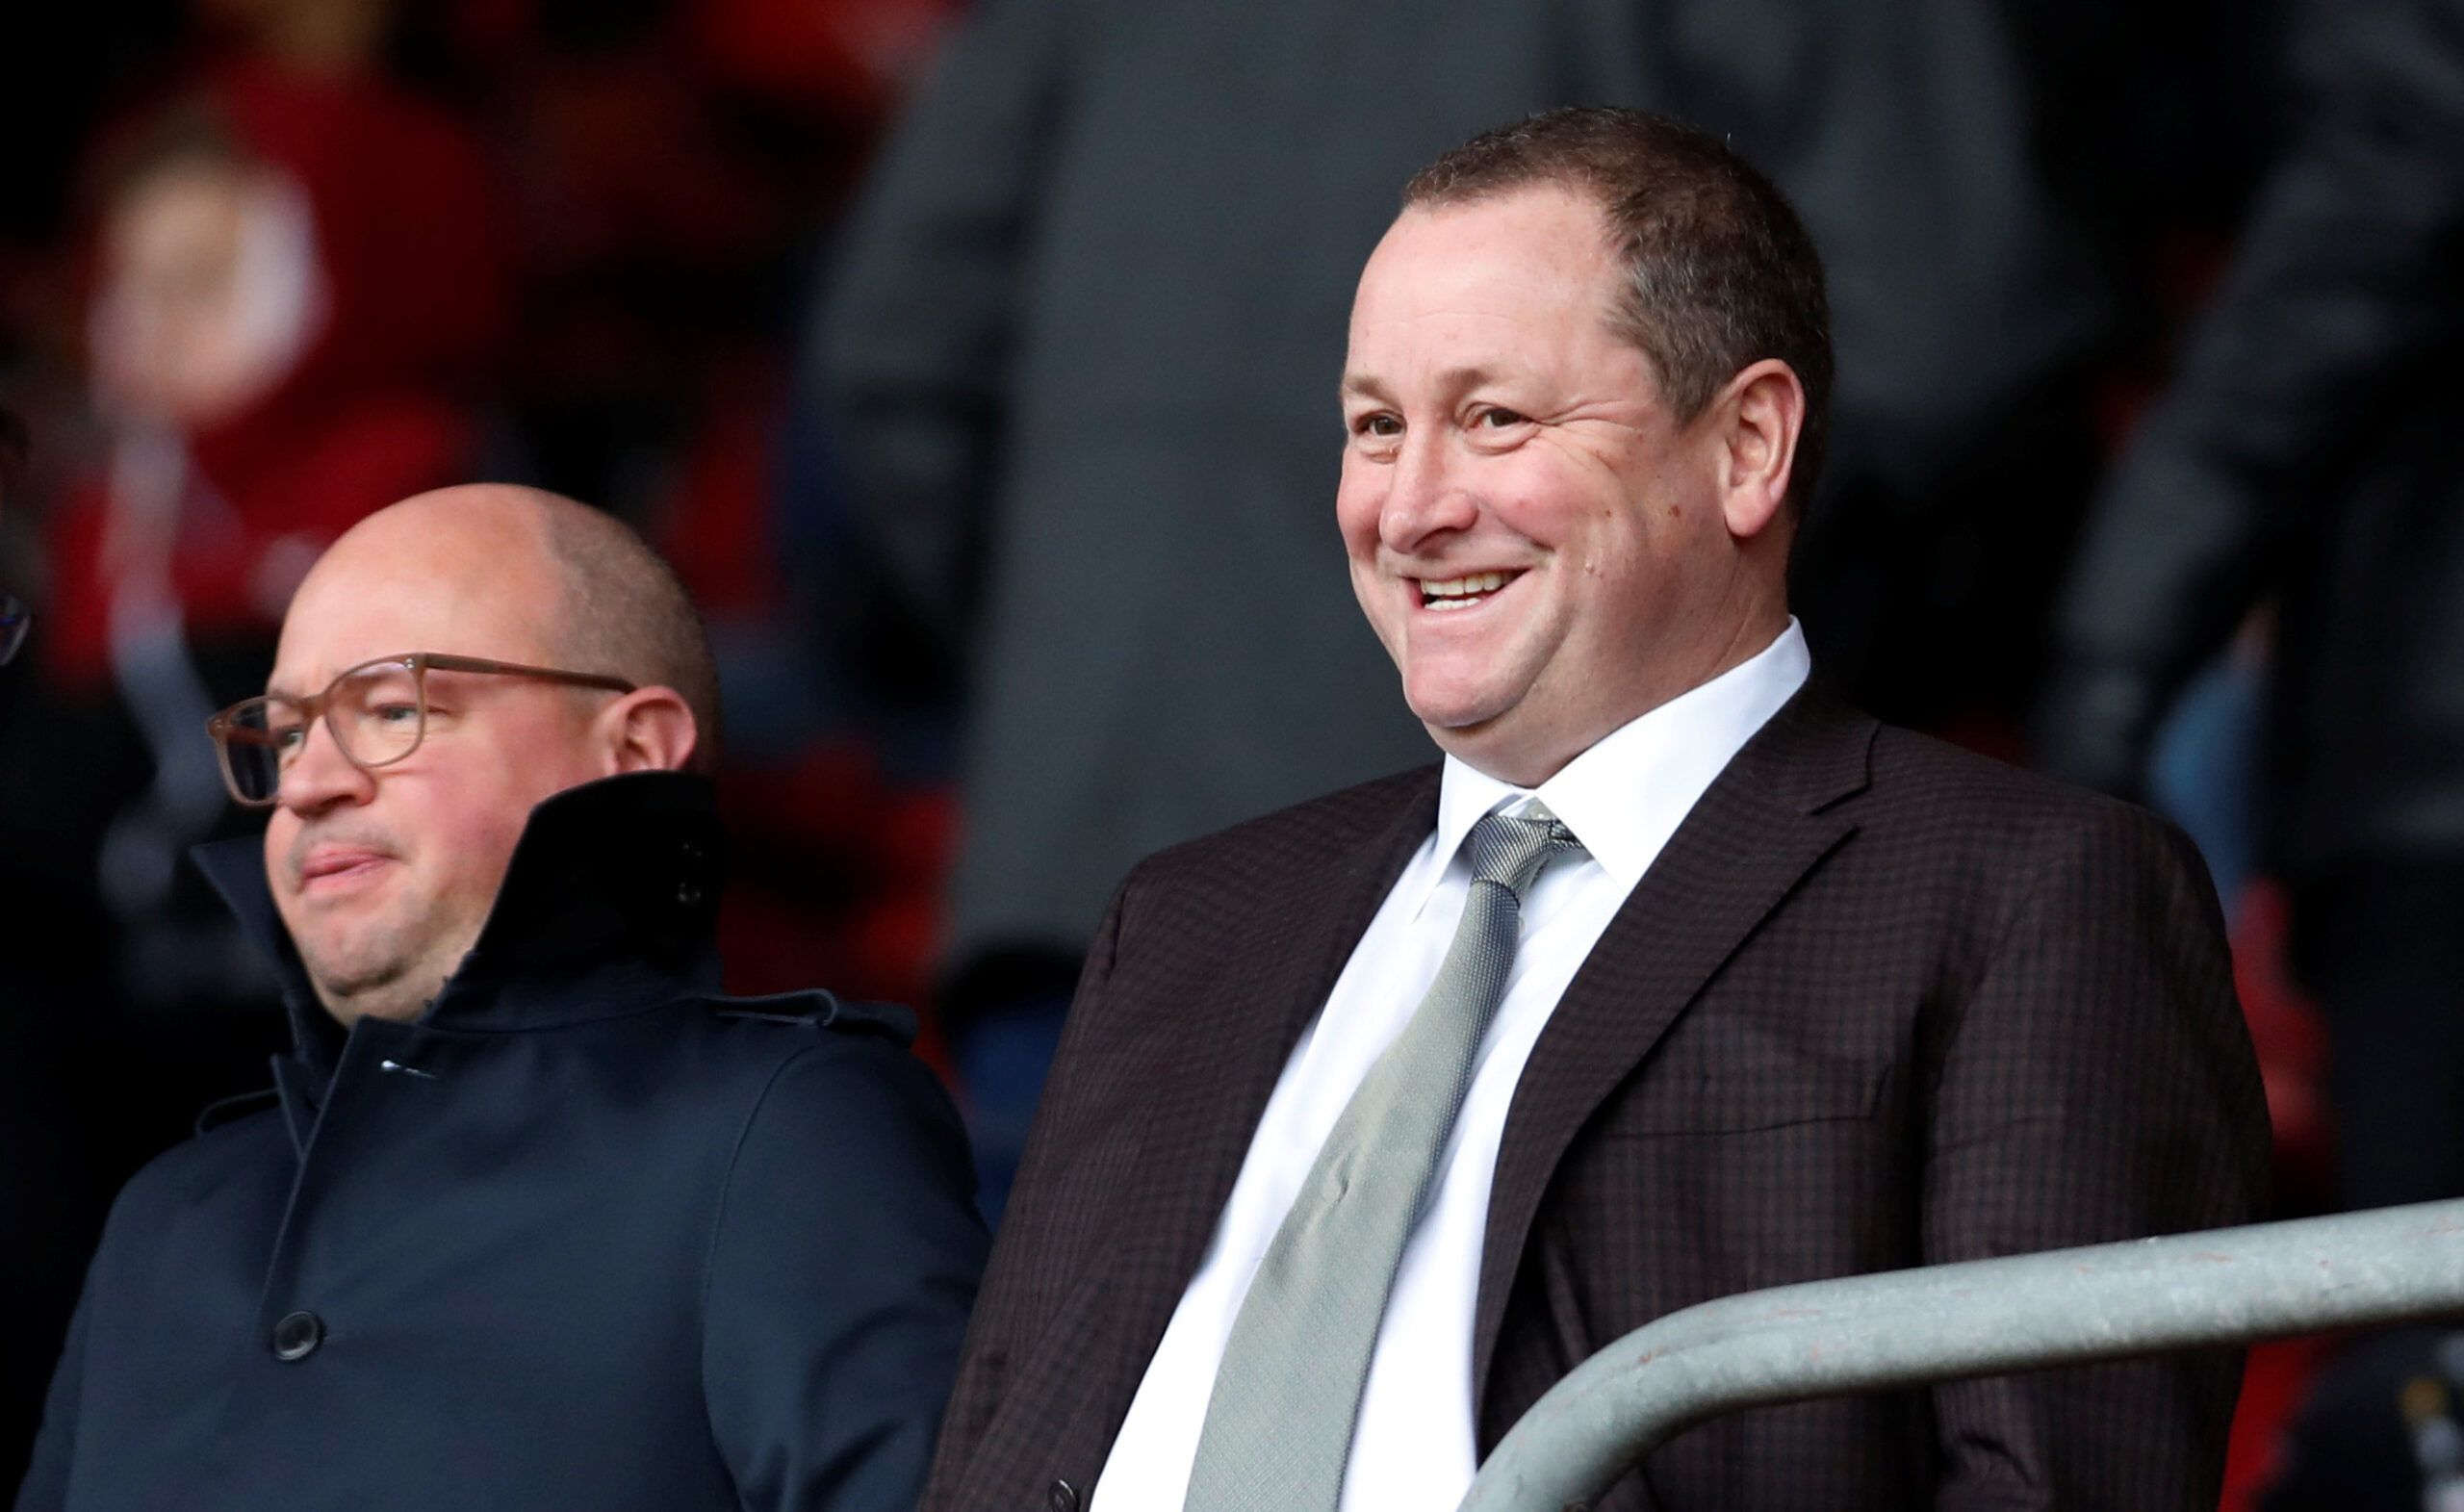 Soccer Football - Premier League - Southampton v Newcastle United - St Mary's Stadium, Southampton, Britain - October 27, 2018  Newcastle United owner Mike Ashley with managing director Lee Charnley before the match    Action Images via Reuters/Paul Childs  EDITORIAL USE ONLY. No use with unauthorized audio, video, data, fixture lists, club/league logos or 